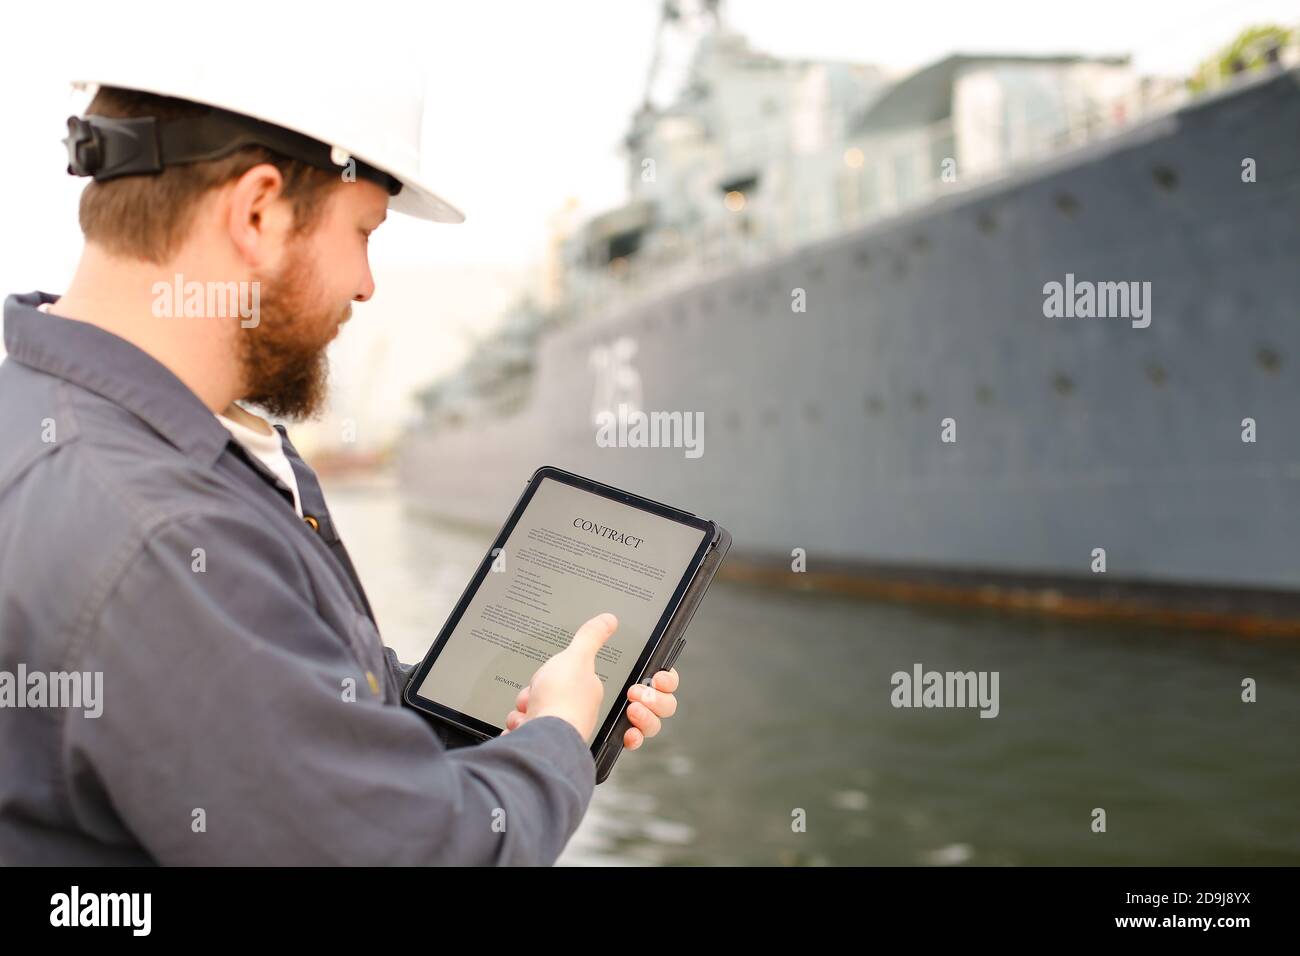 Captain in helmet reading contract on tablet near vessel in background. Stock Photo